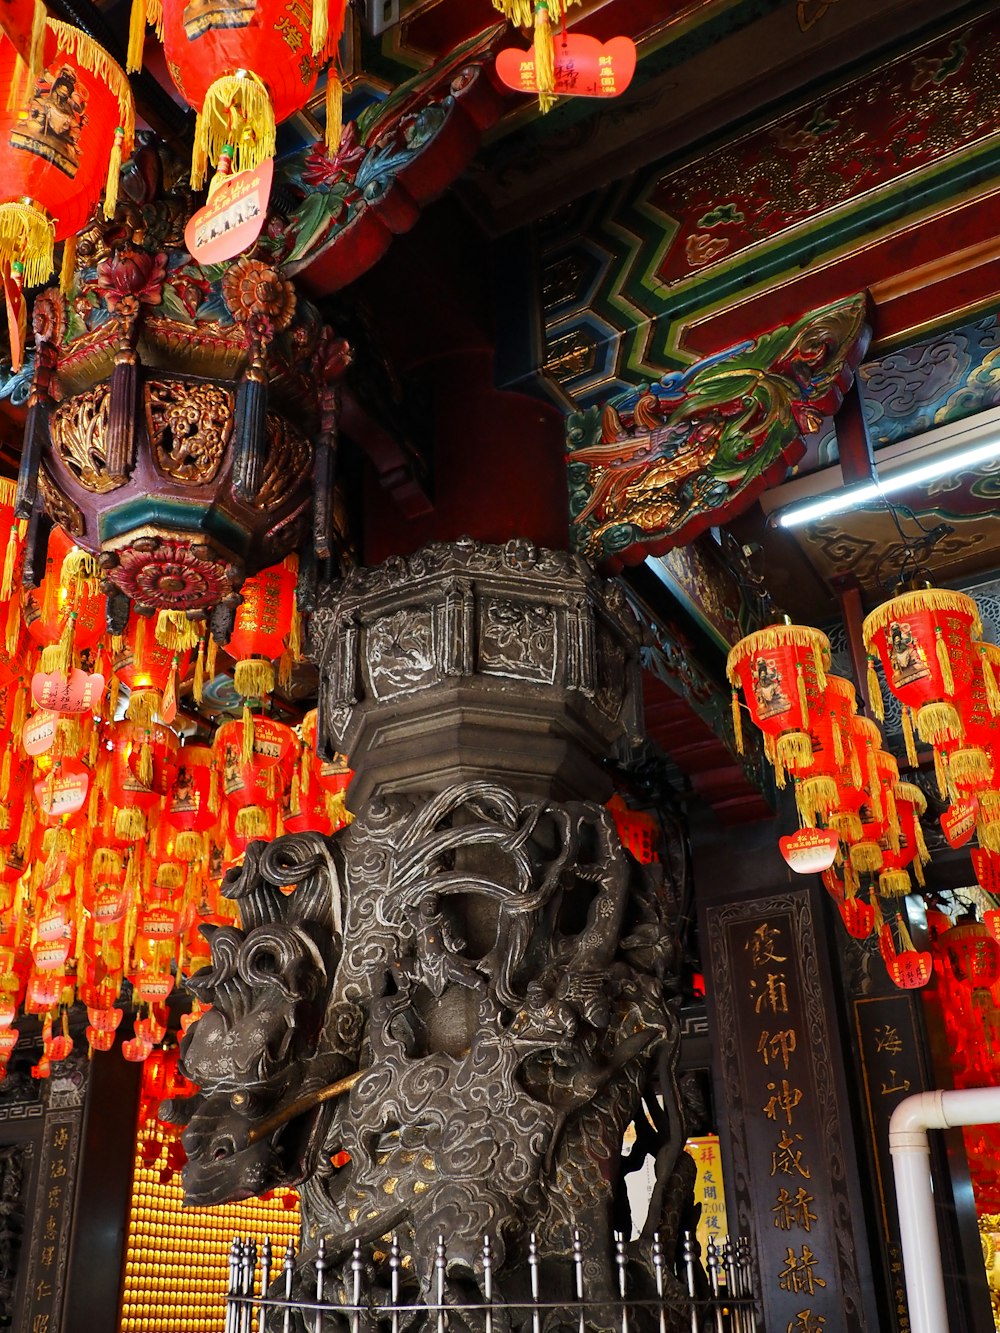 a statue of a lion surrounded by red lanterns